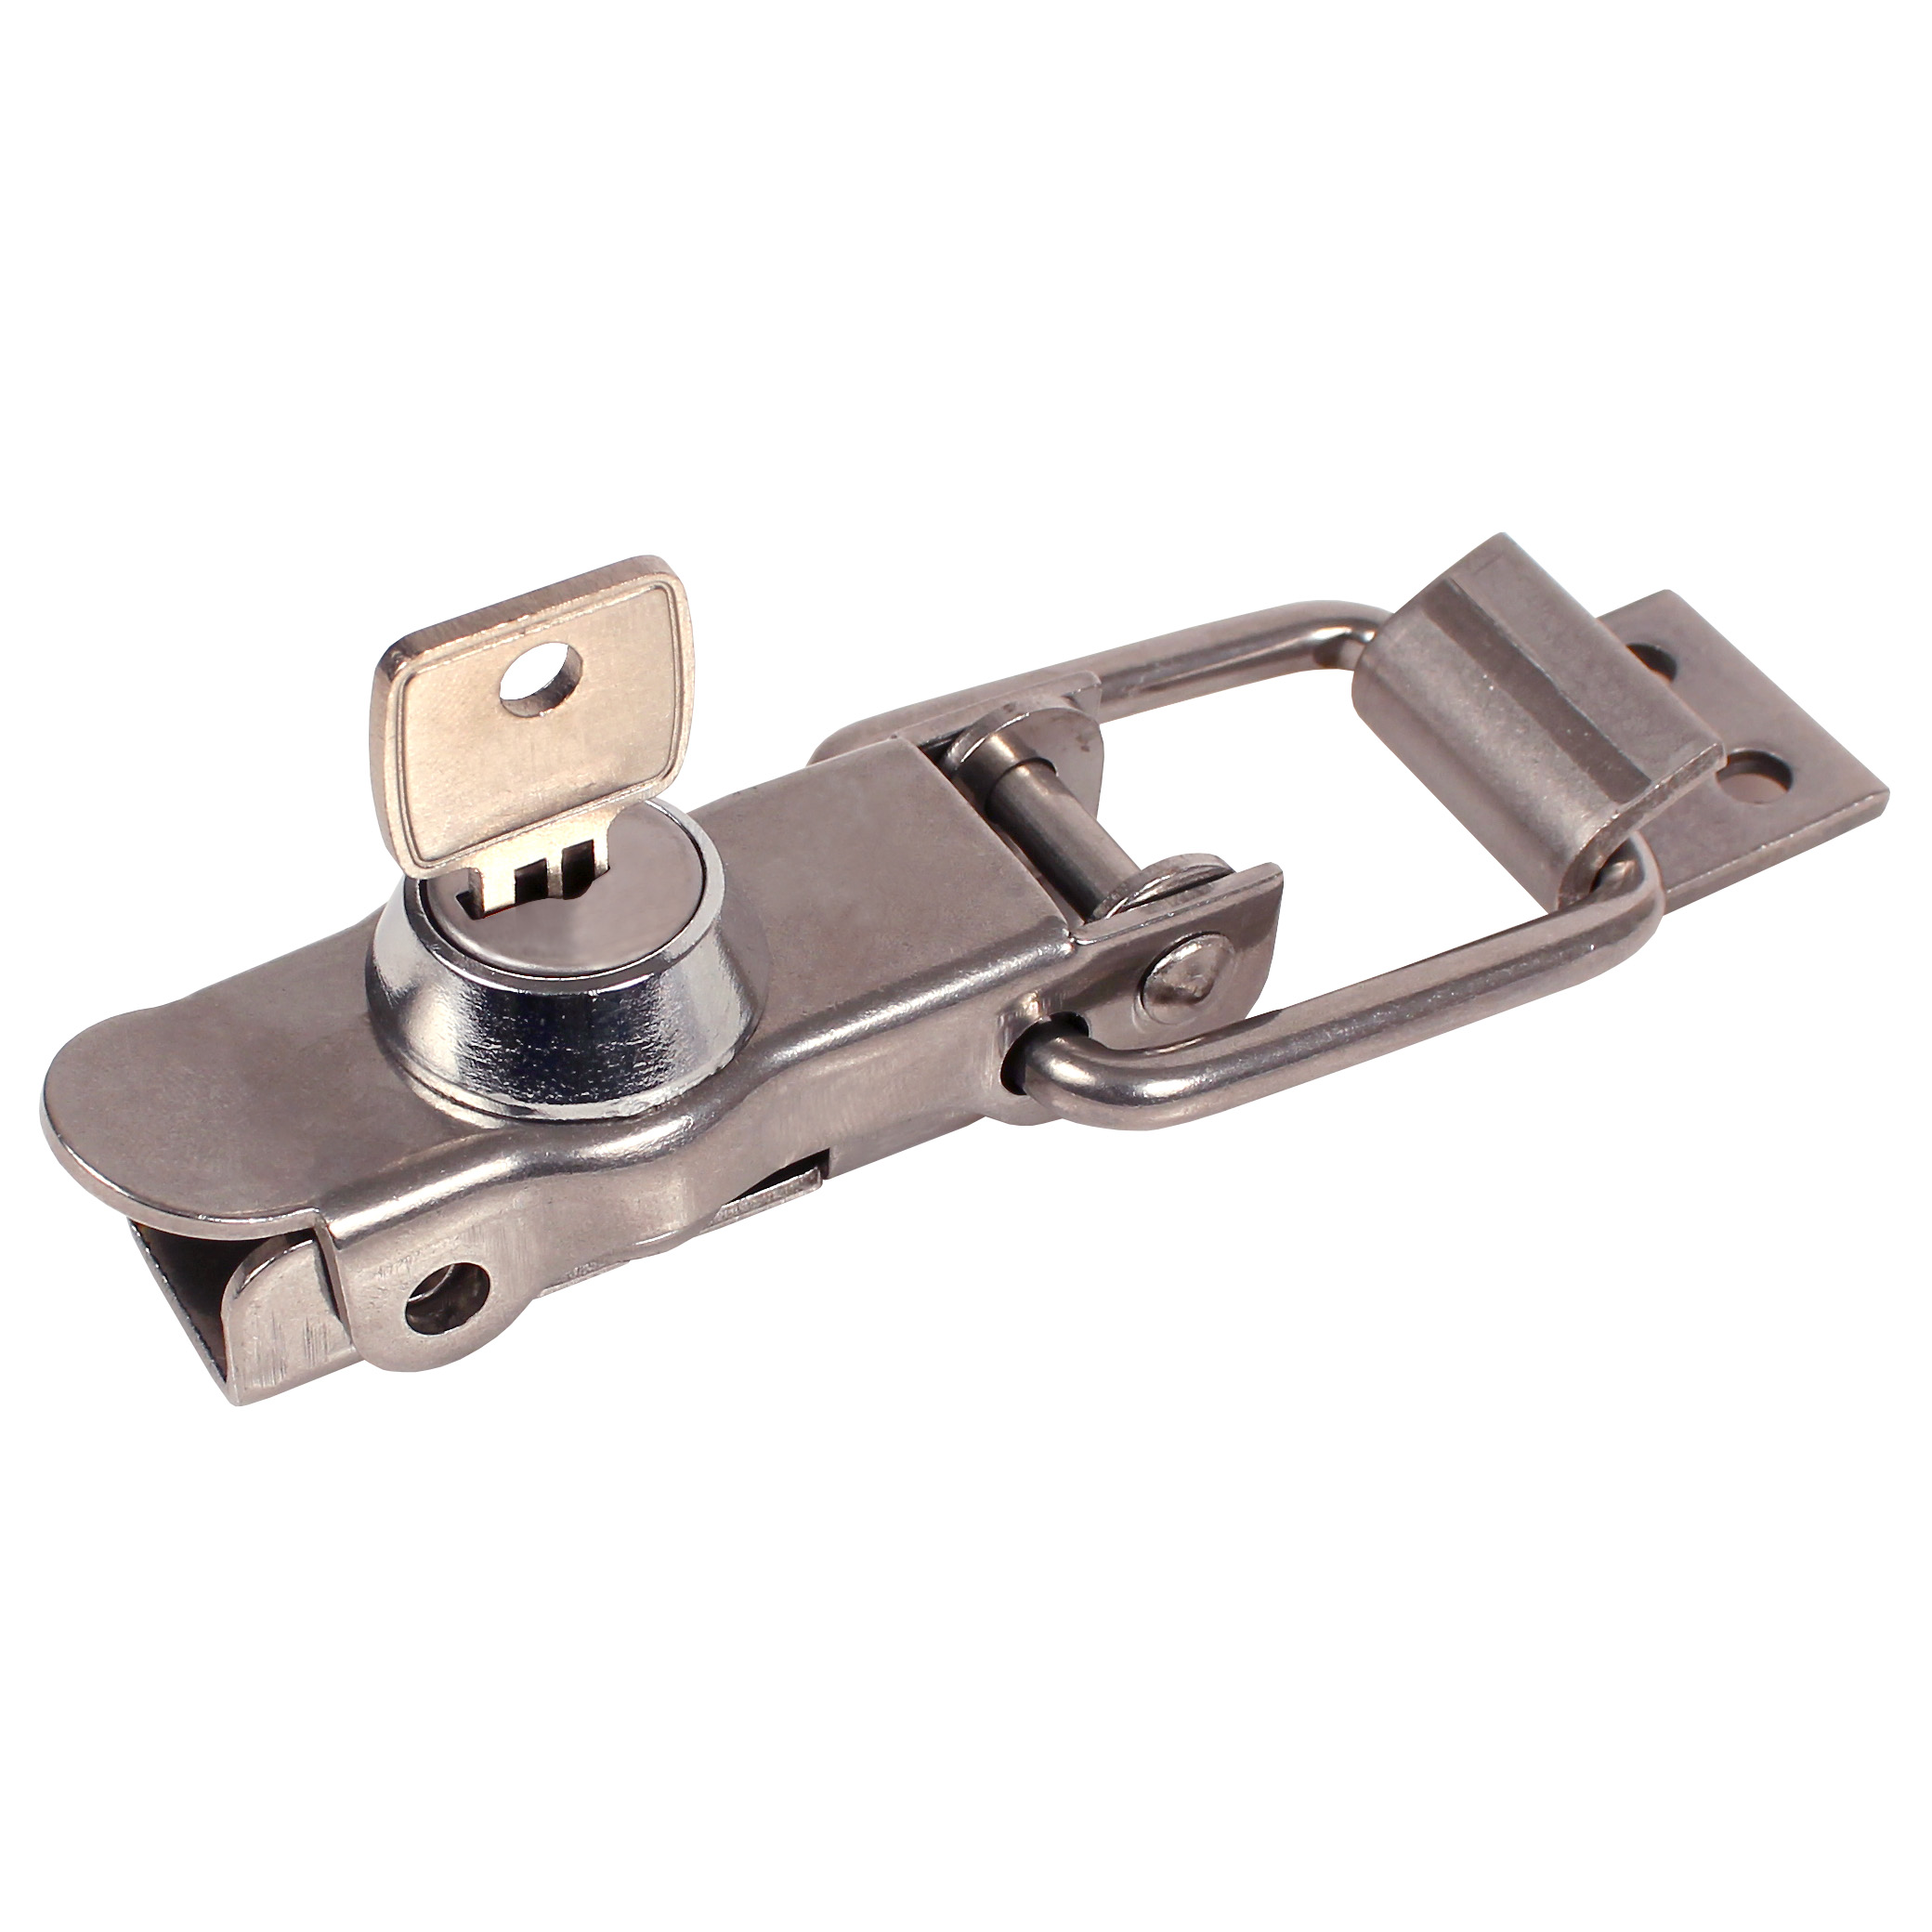 Latch clamp with lock - Lockable -  - 